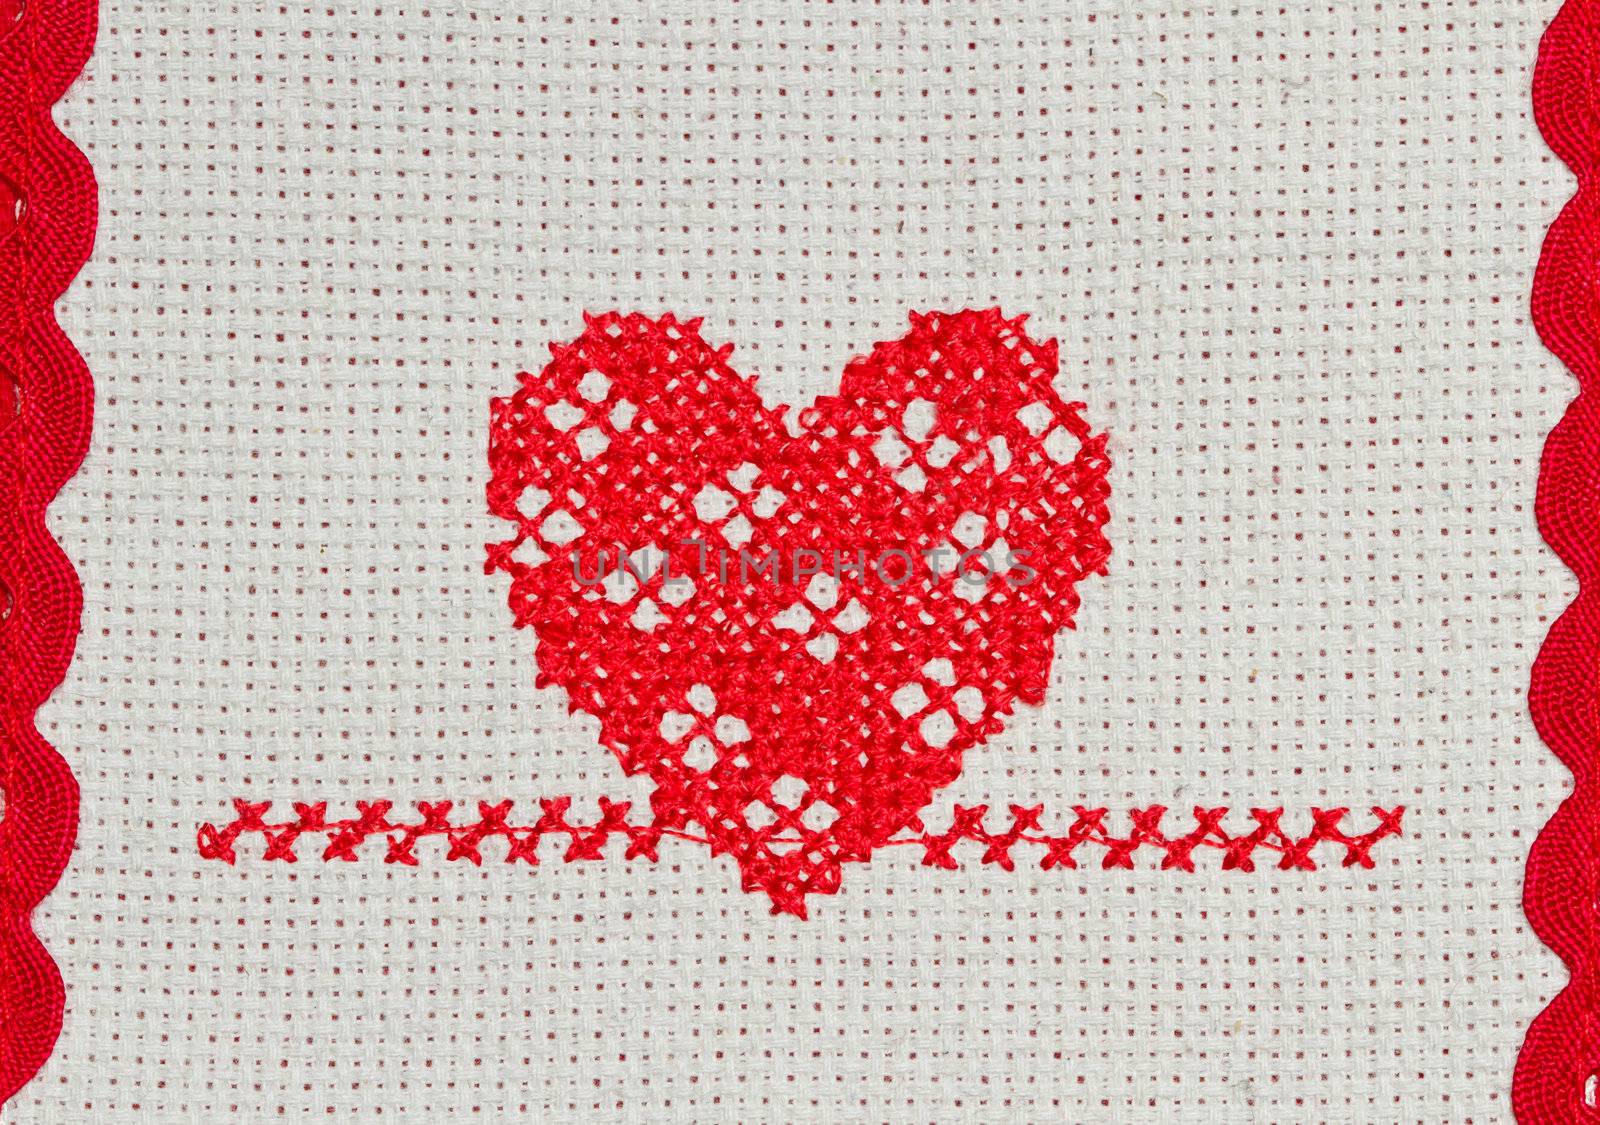 red heart embroidered in cross stitch on  canvas 